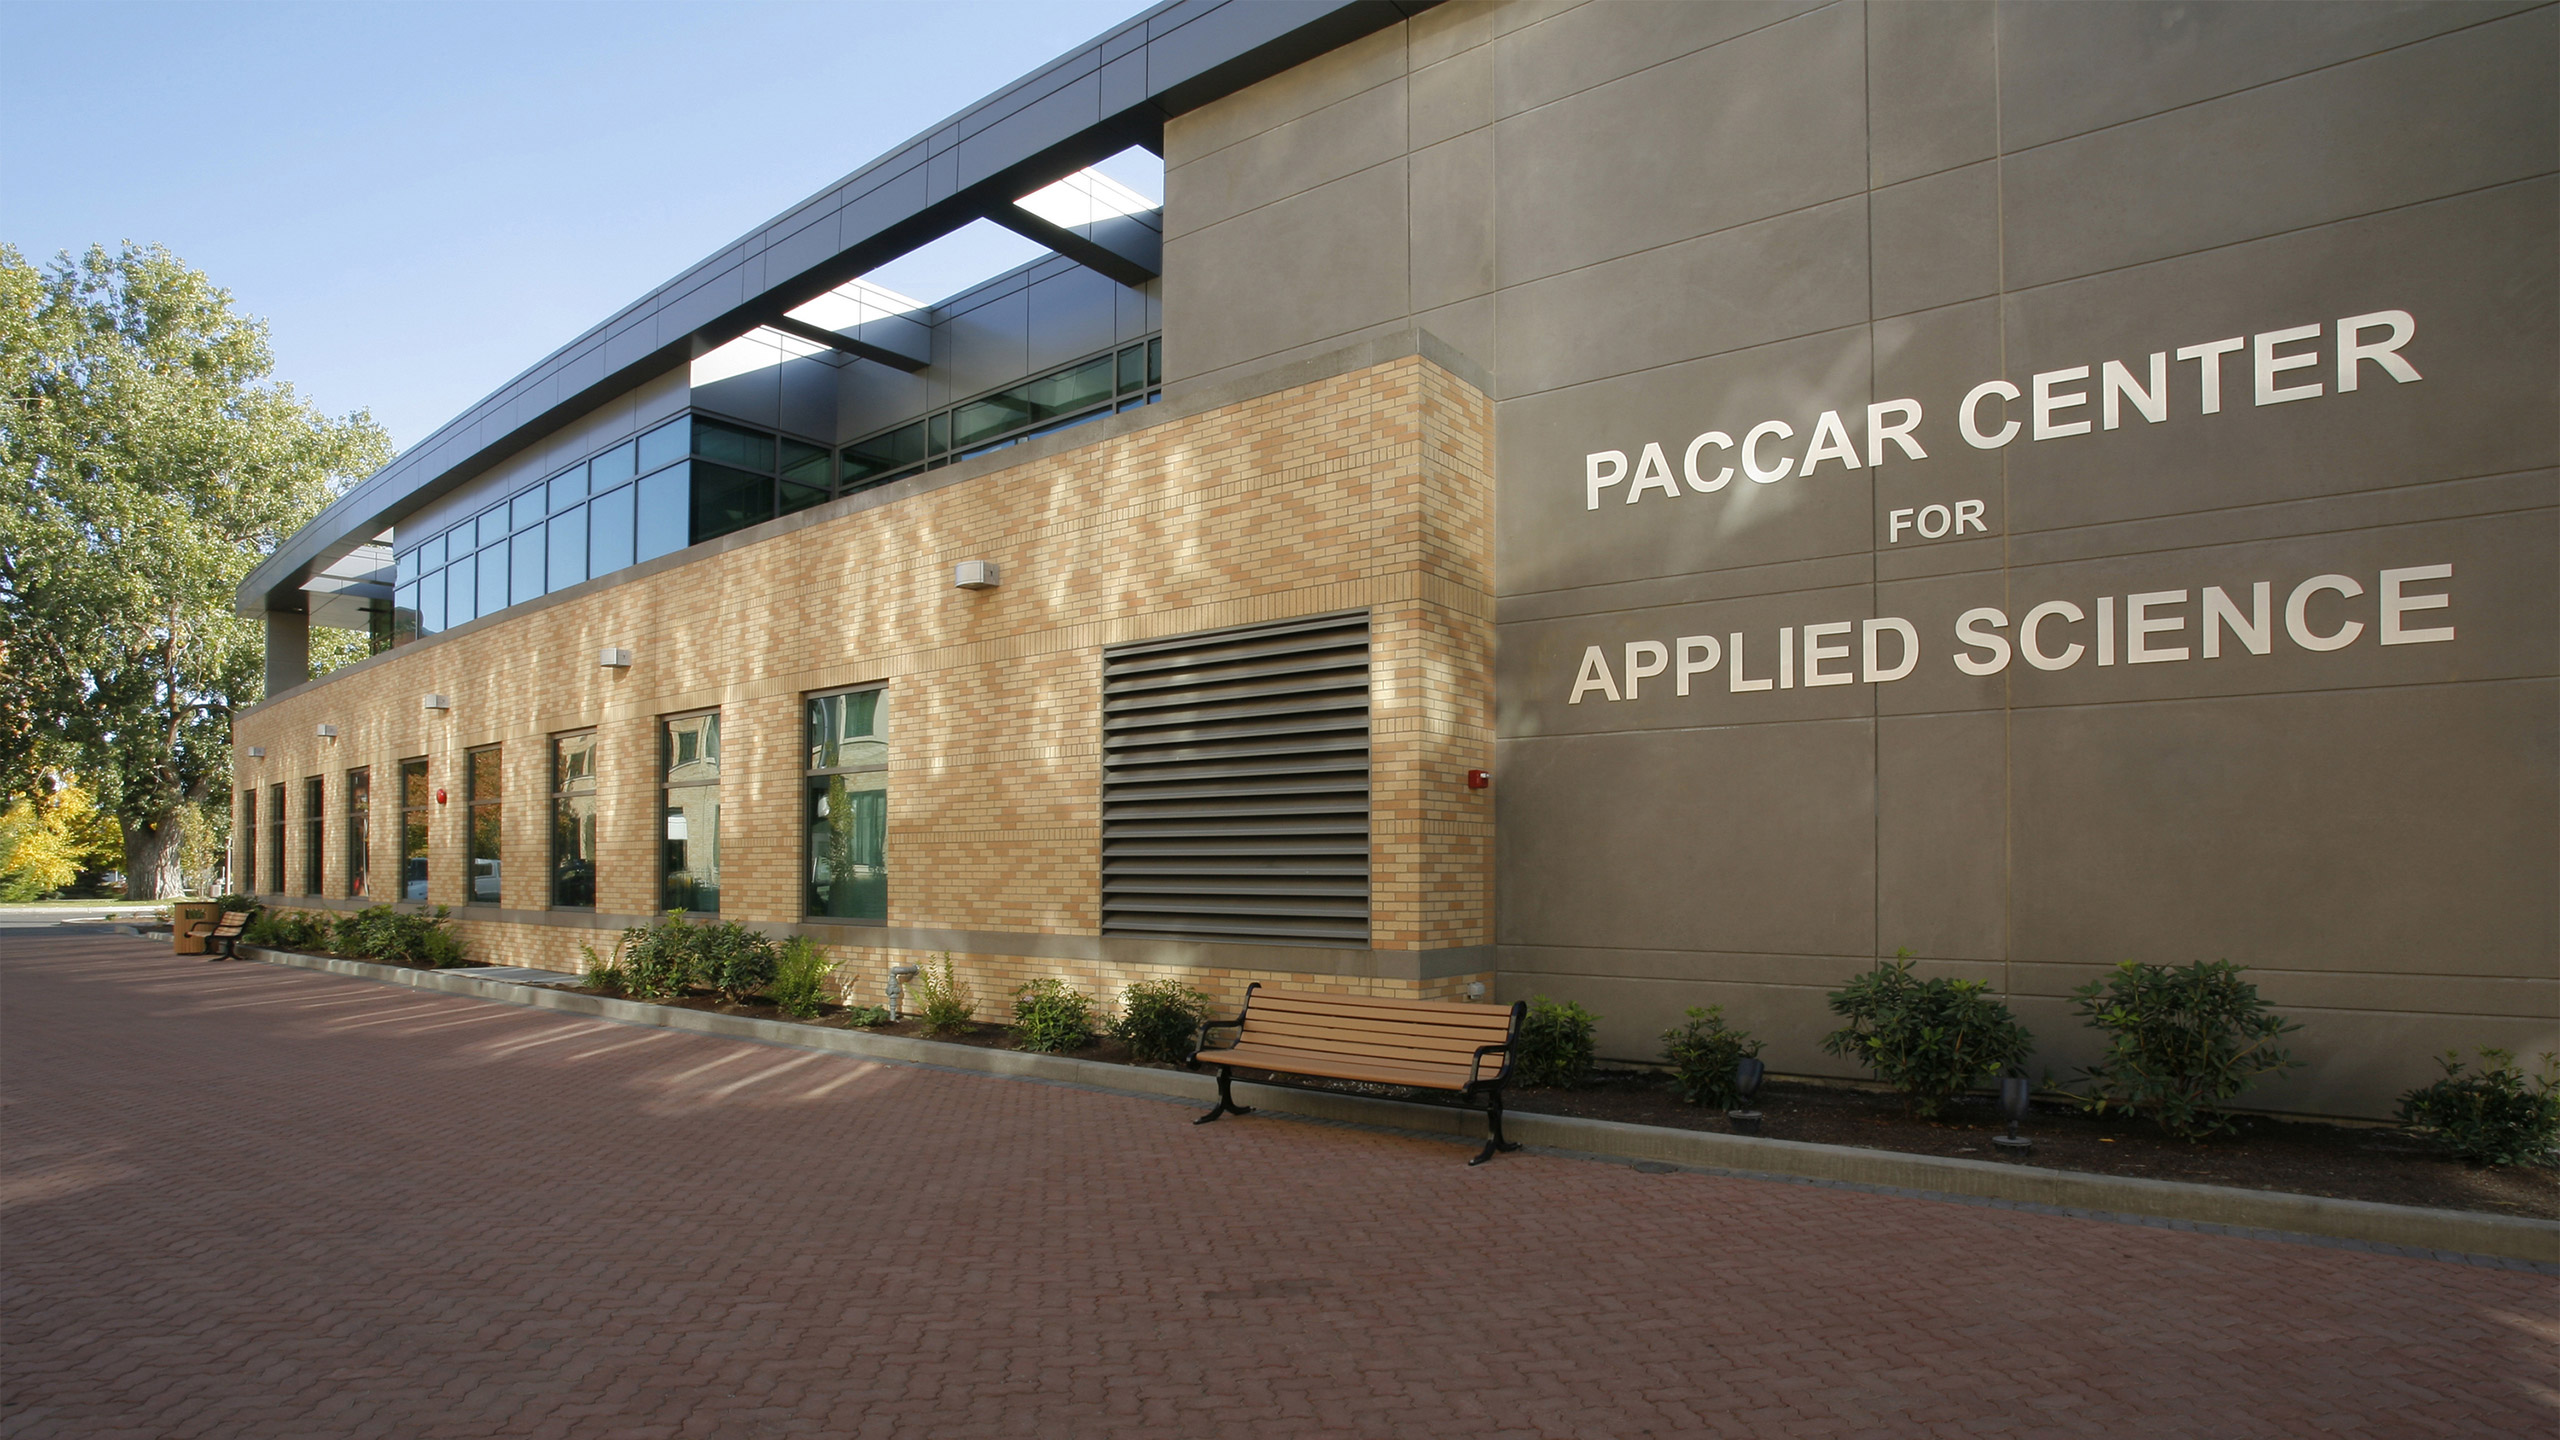 ALSC Architects GUPaccar ext signage